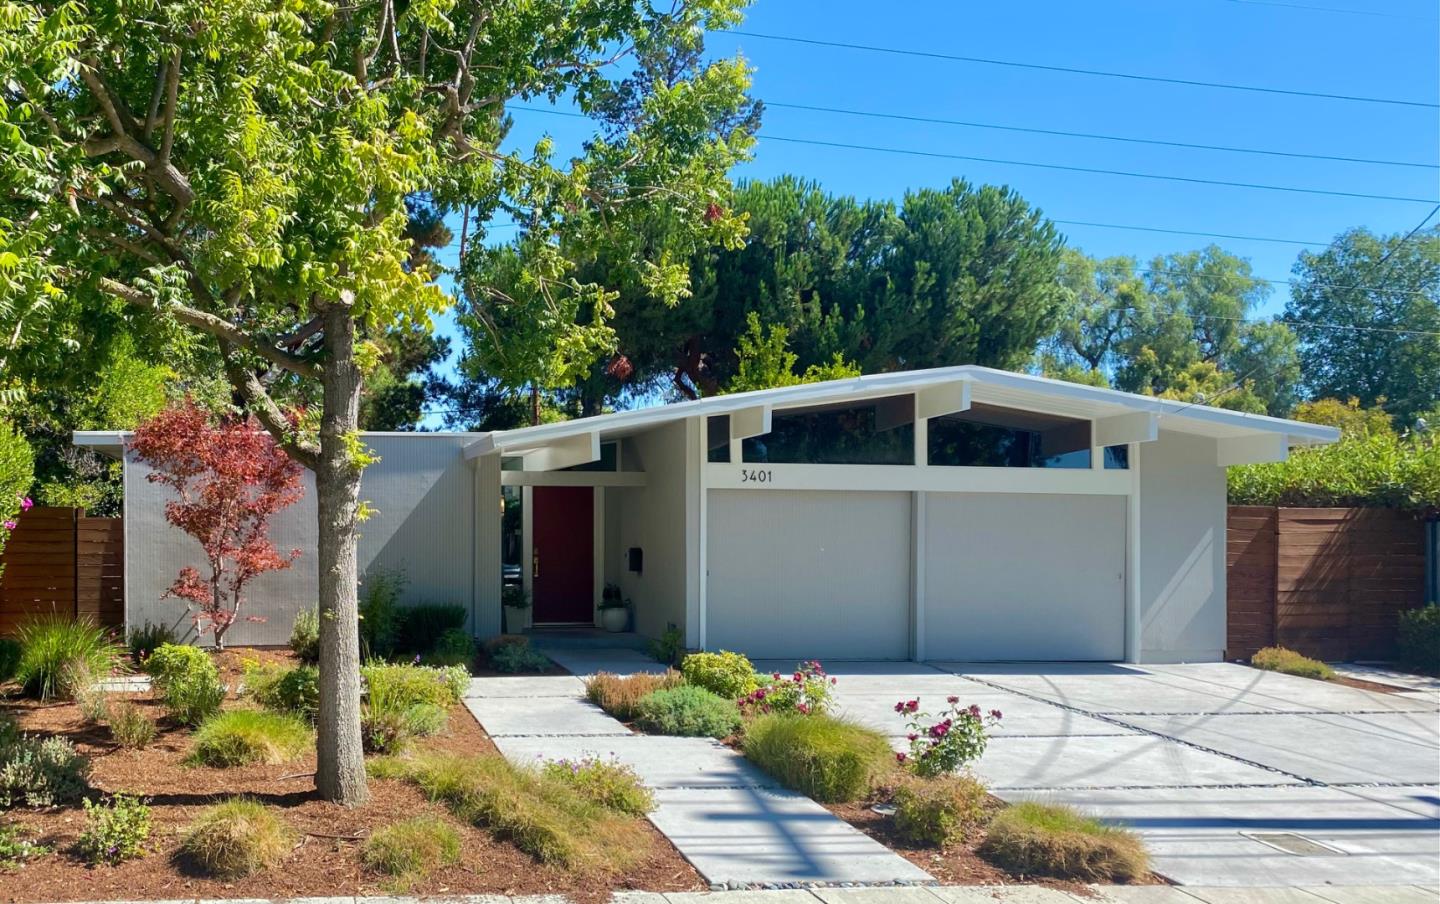 Photo of 3401 Kenneth Dr in Palo Alto, CA